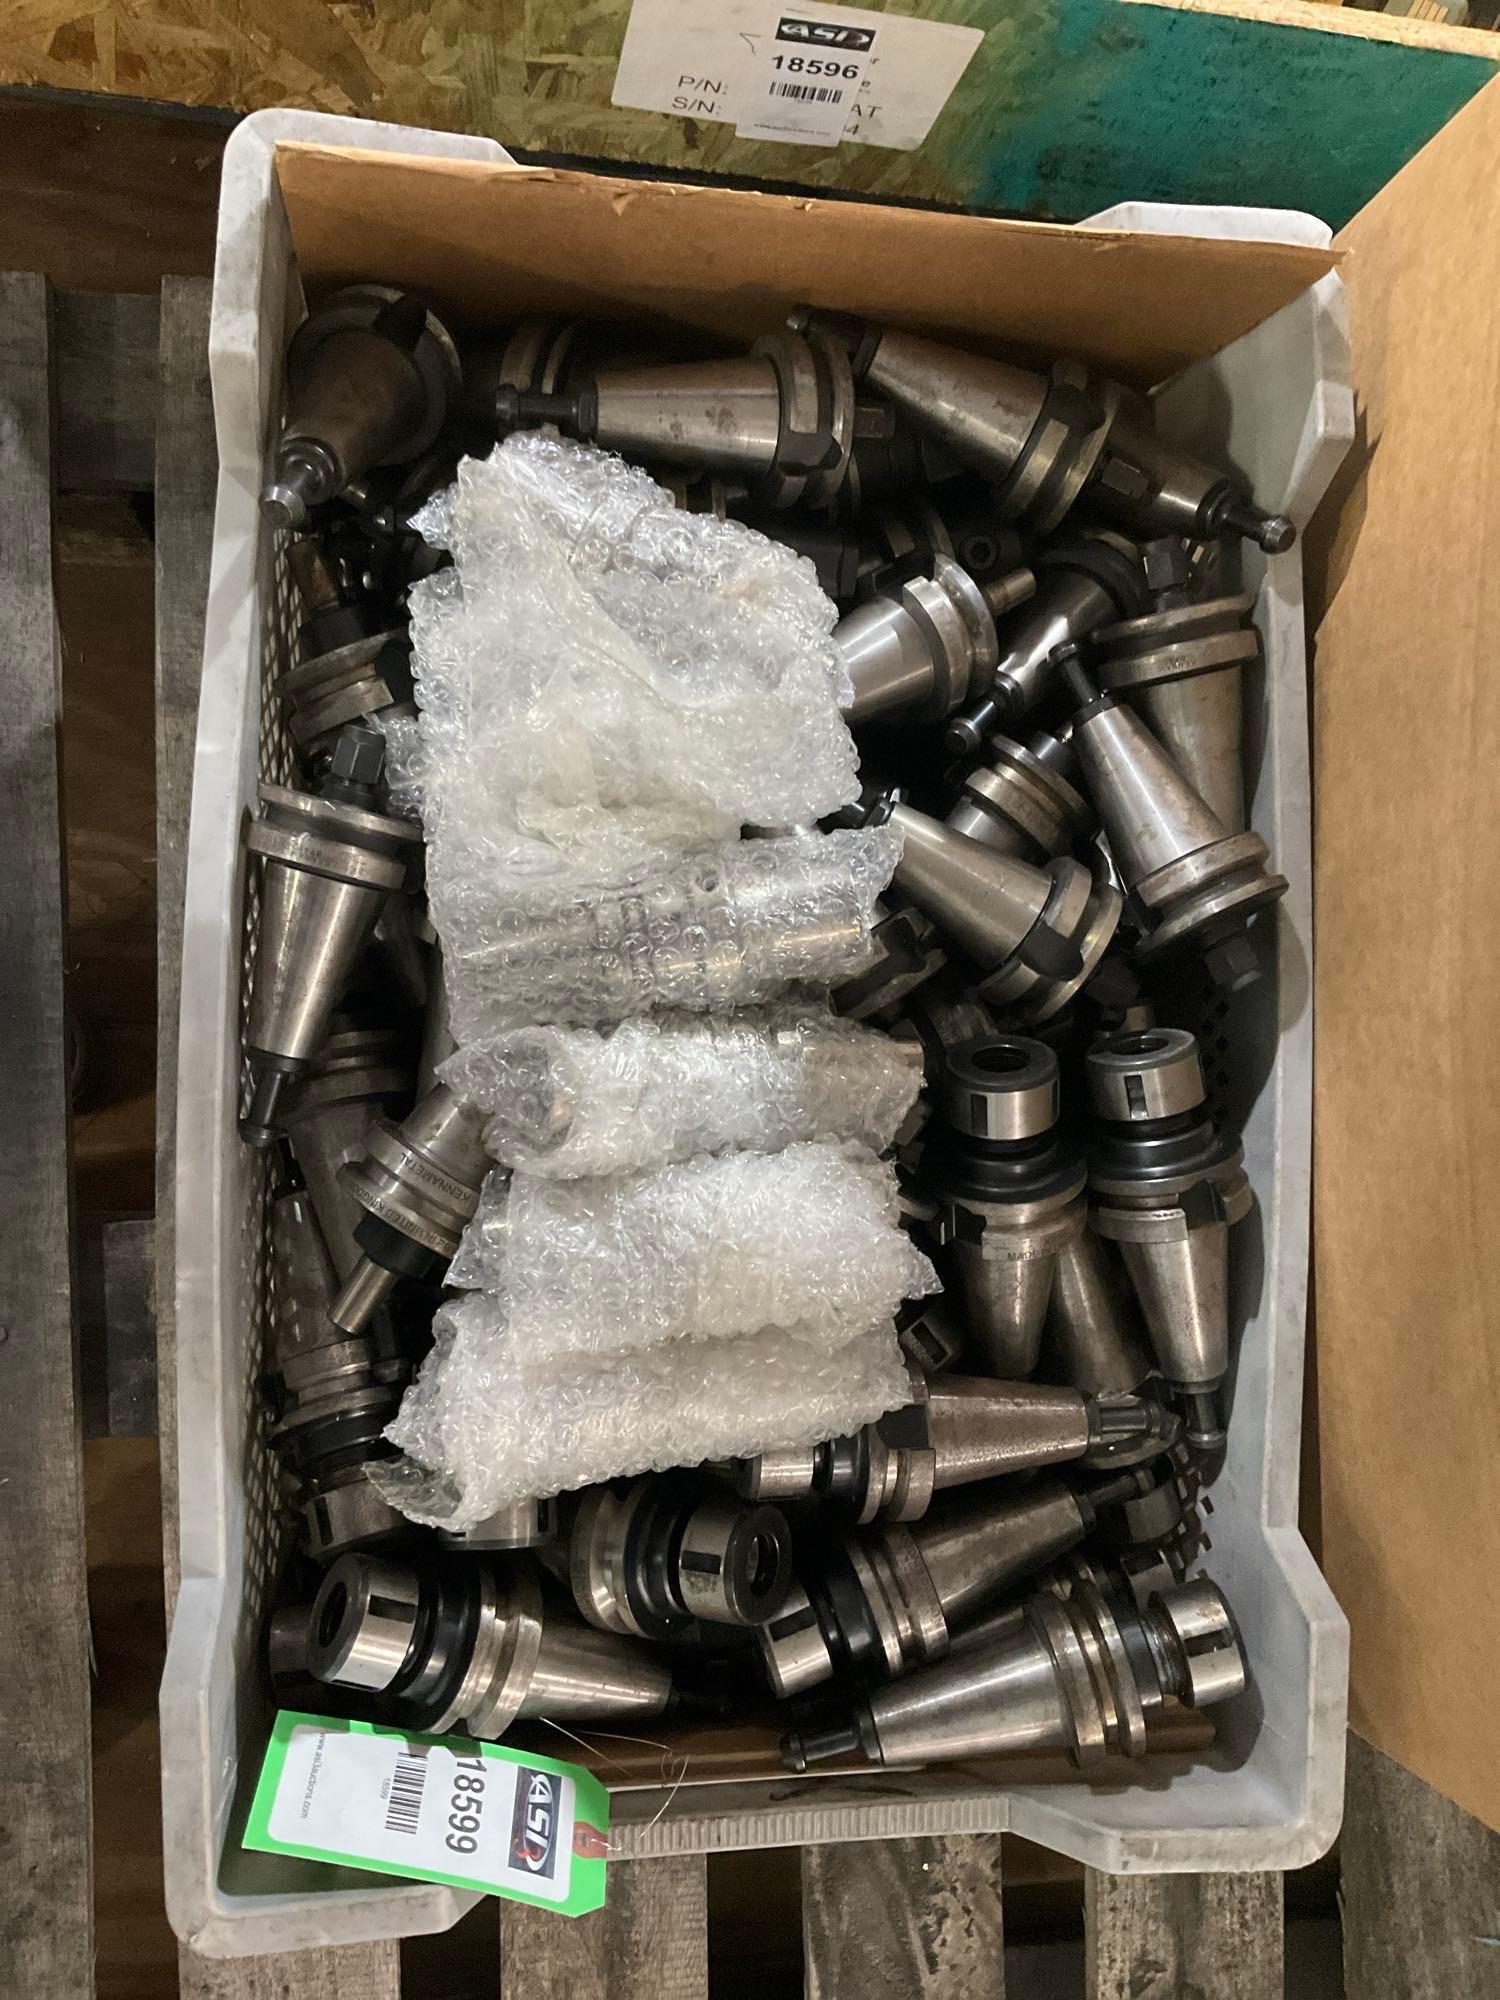 OVER 200 PARLEC, KENNAMETAL, BIG DAISHOWA...COLLET CHUCK; VARIOUS MAKES, MODELS, AND SIZES